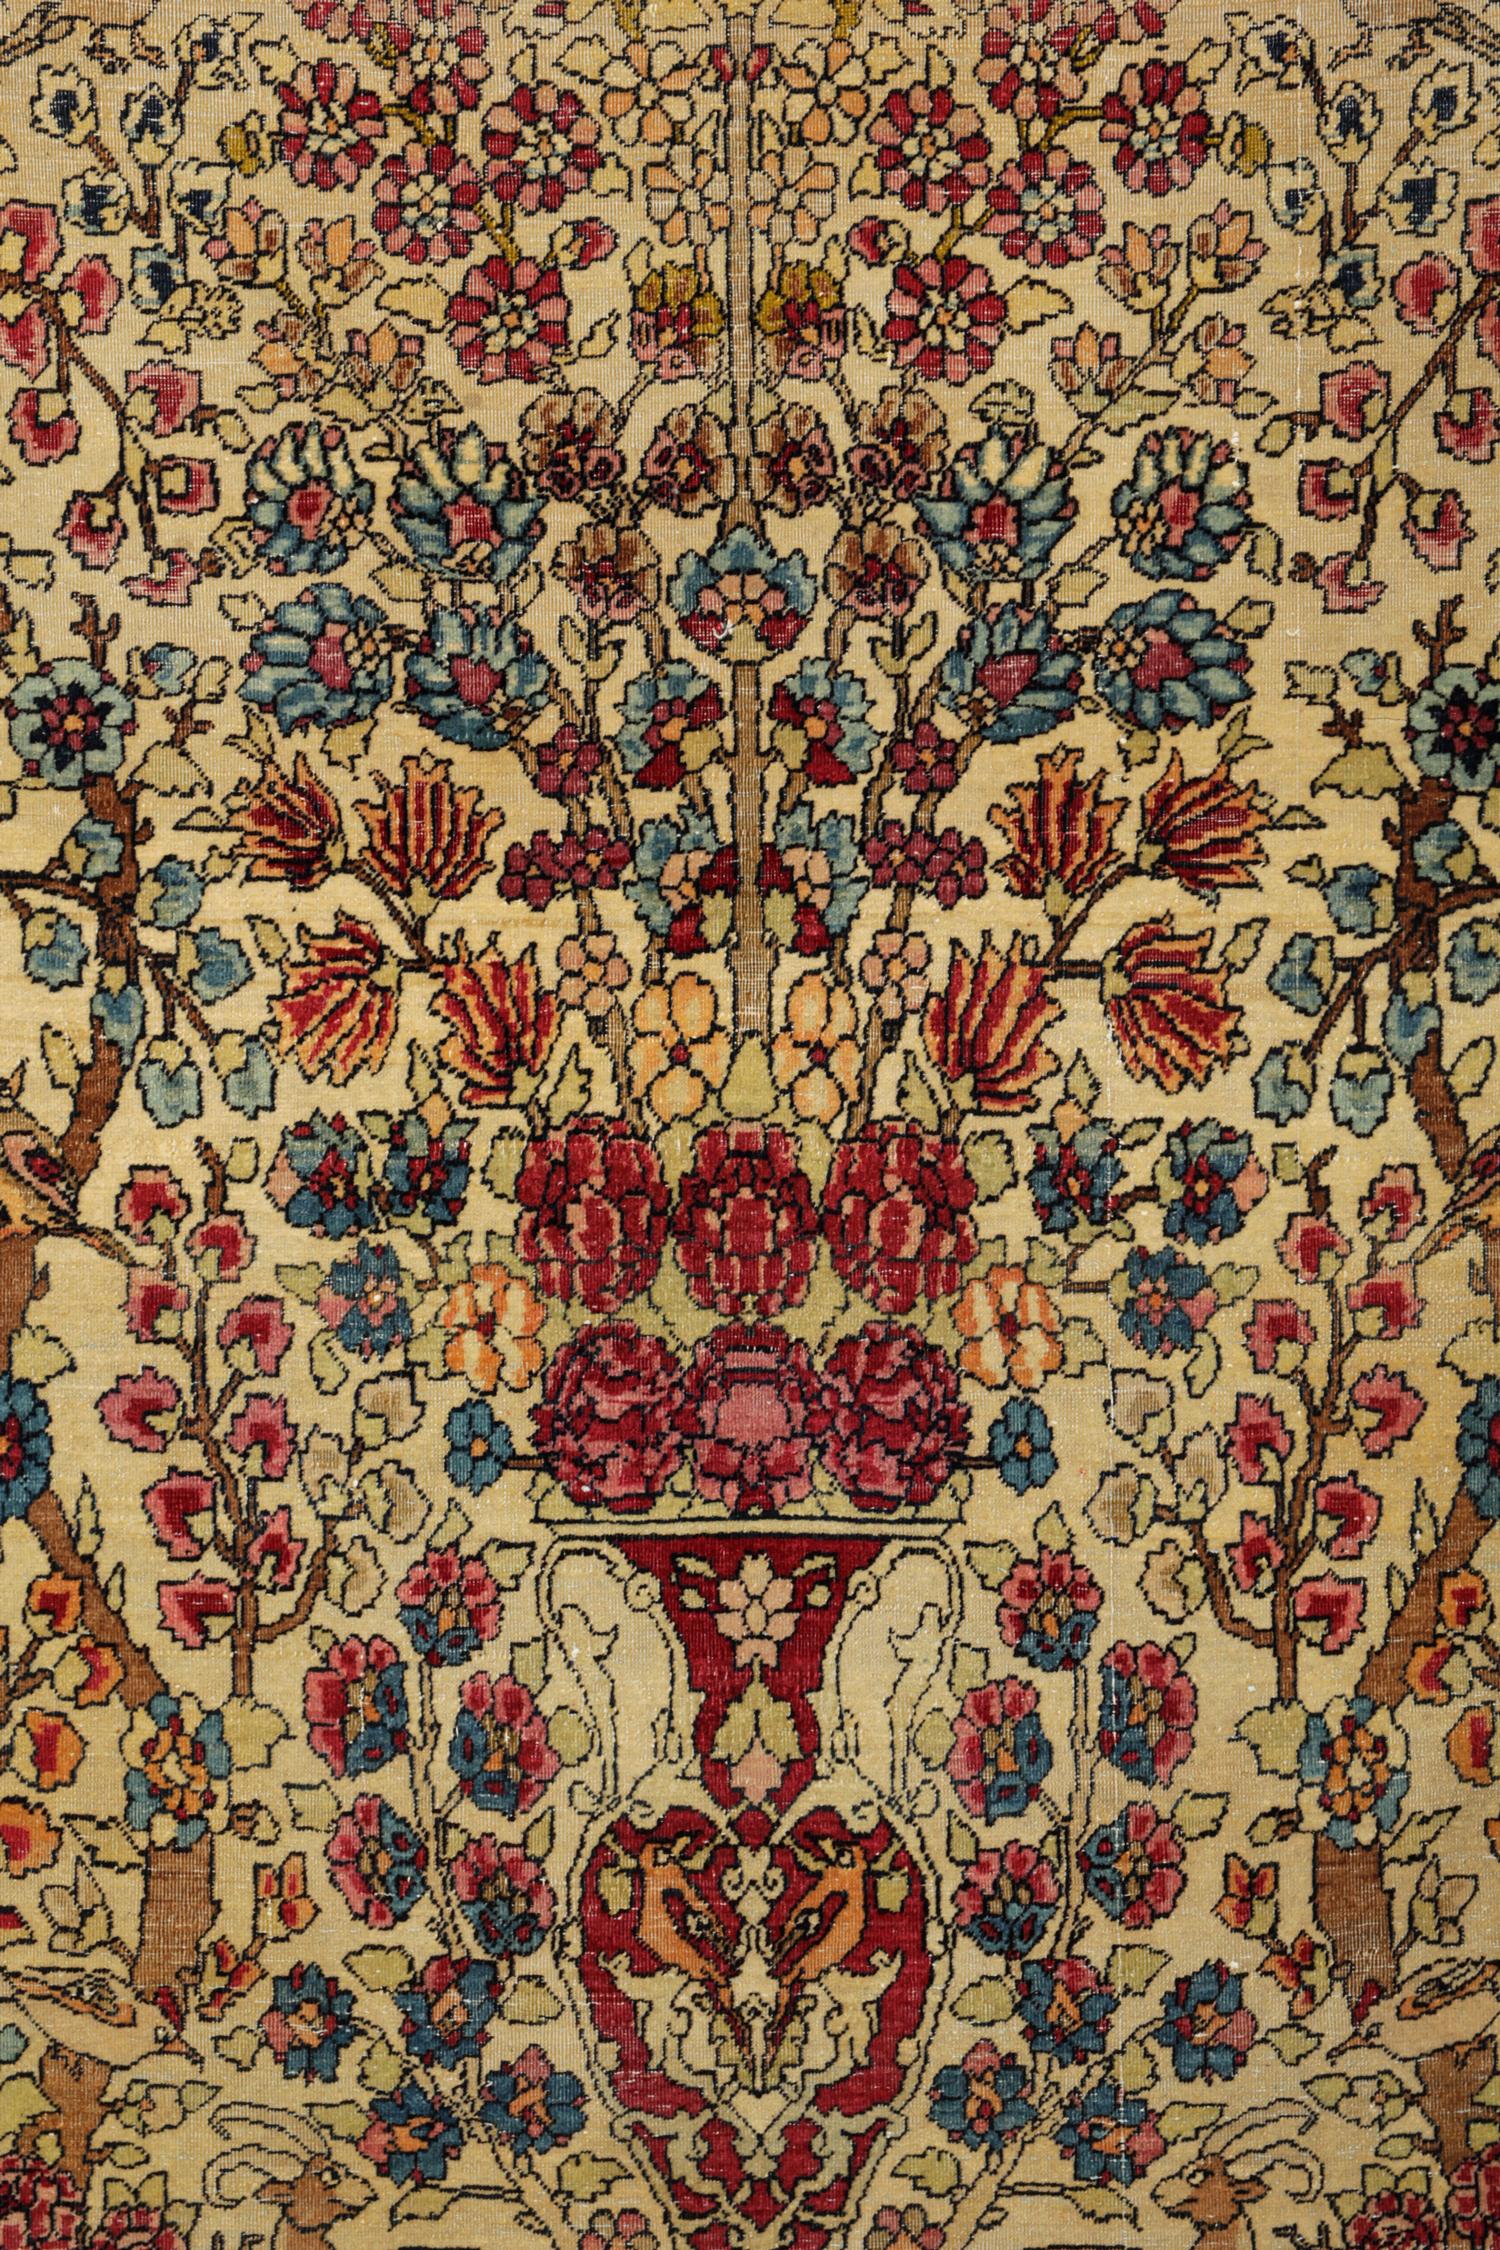 This rare wool rug is a fine example of an antique carpet woven in the 1870s. The design features an intricately woven vase. Highly-detailed floral and botanical arrangements flow from the top of the vase woven in orange, blue and red accents on an